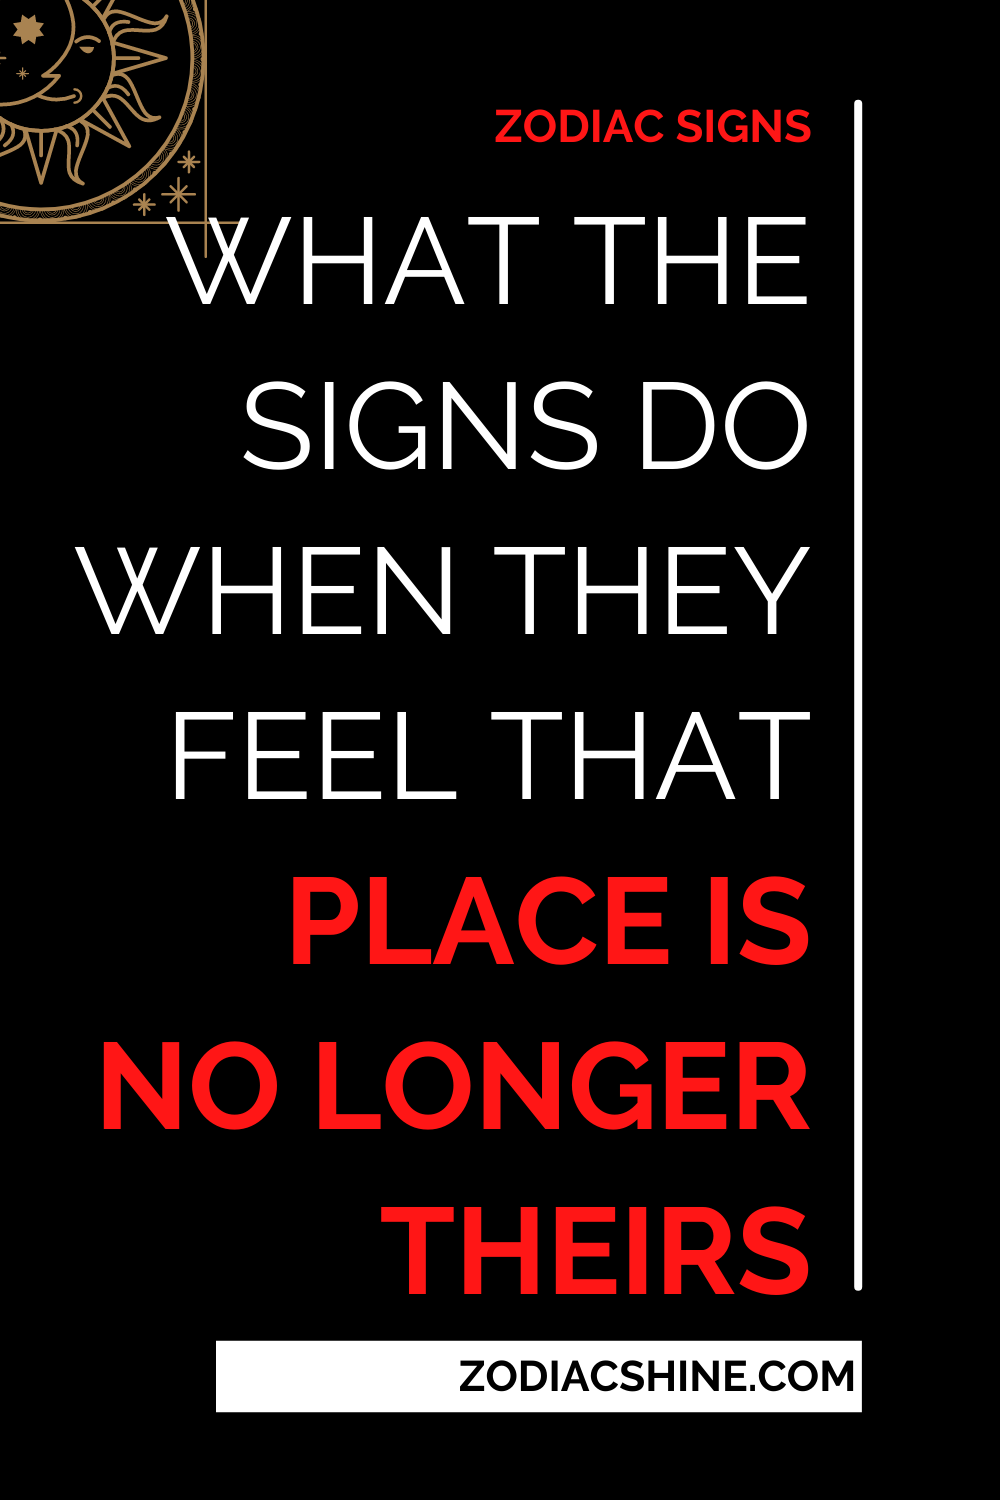 What The Signs Do When They Feel That Place Is No Longer Theirs